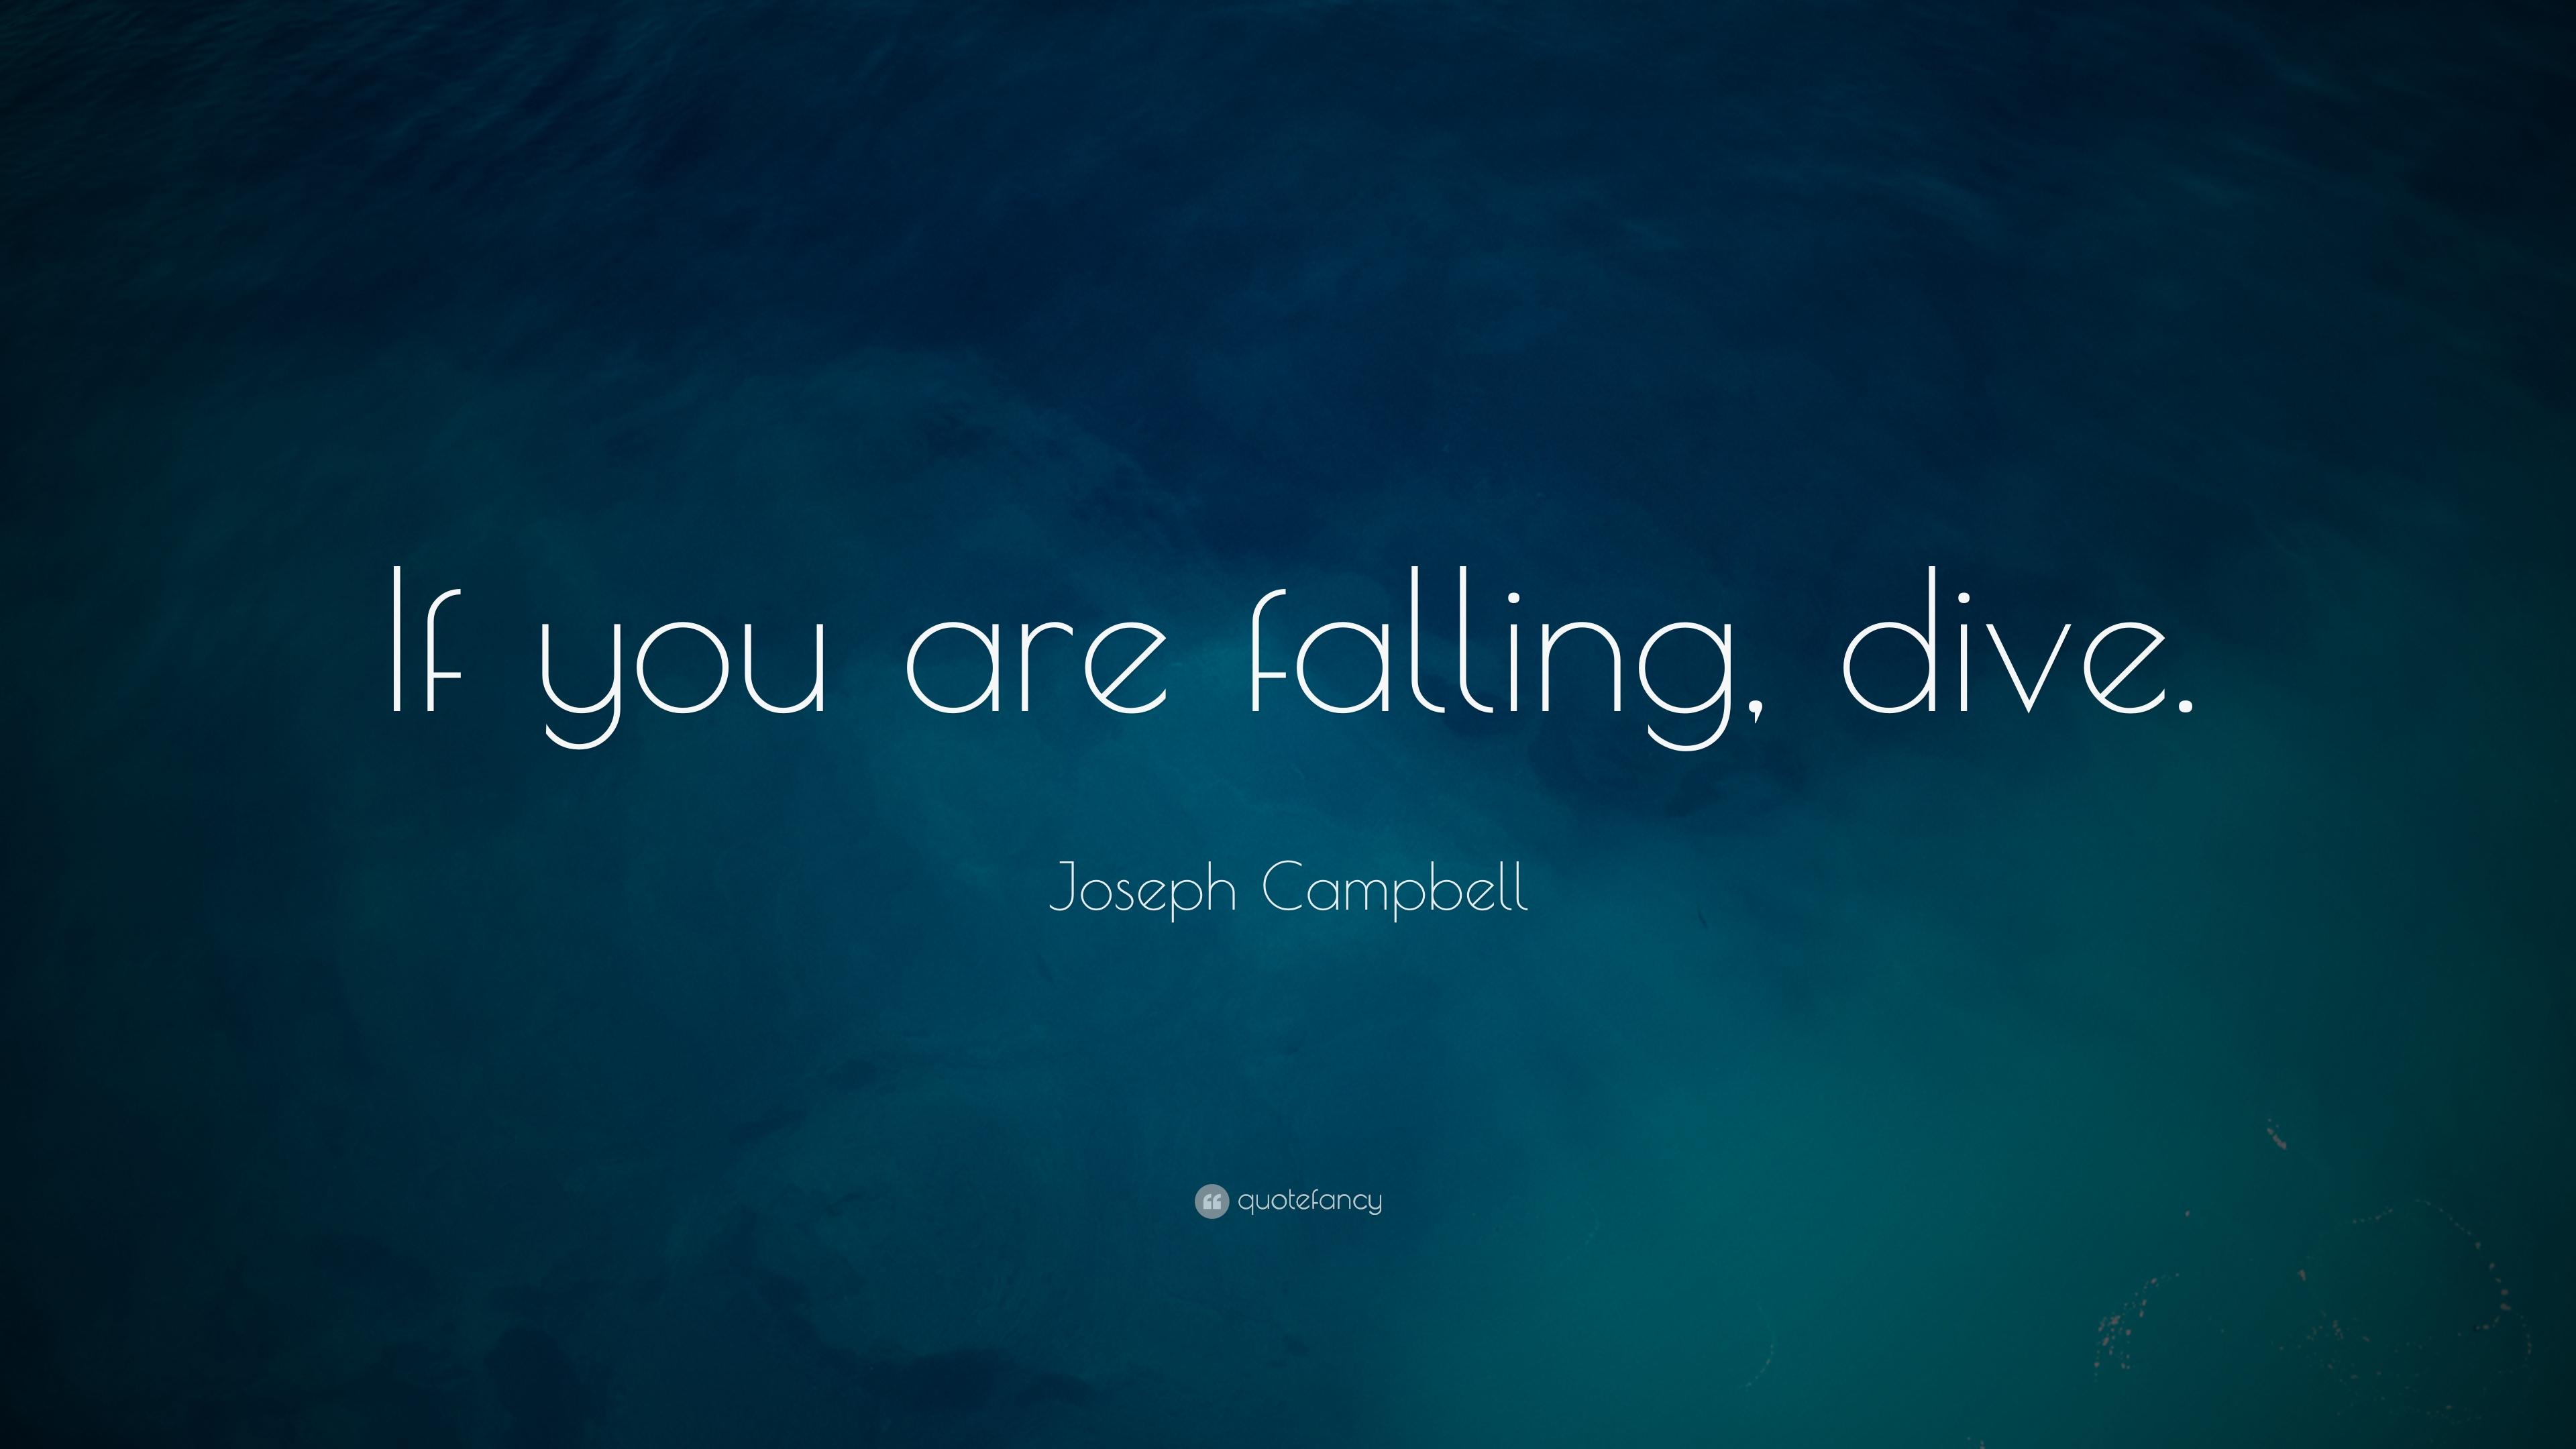 Joseph Campbell Quote: “If you are falling, dive.” 15